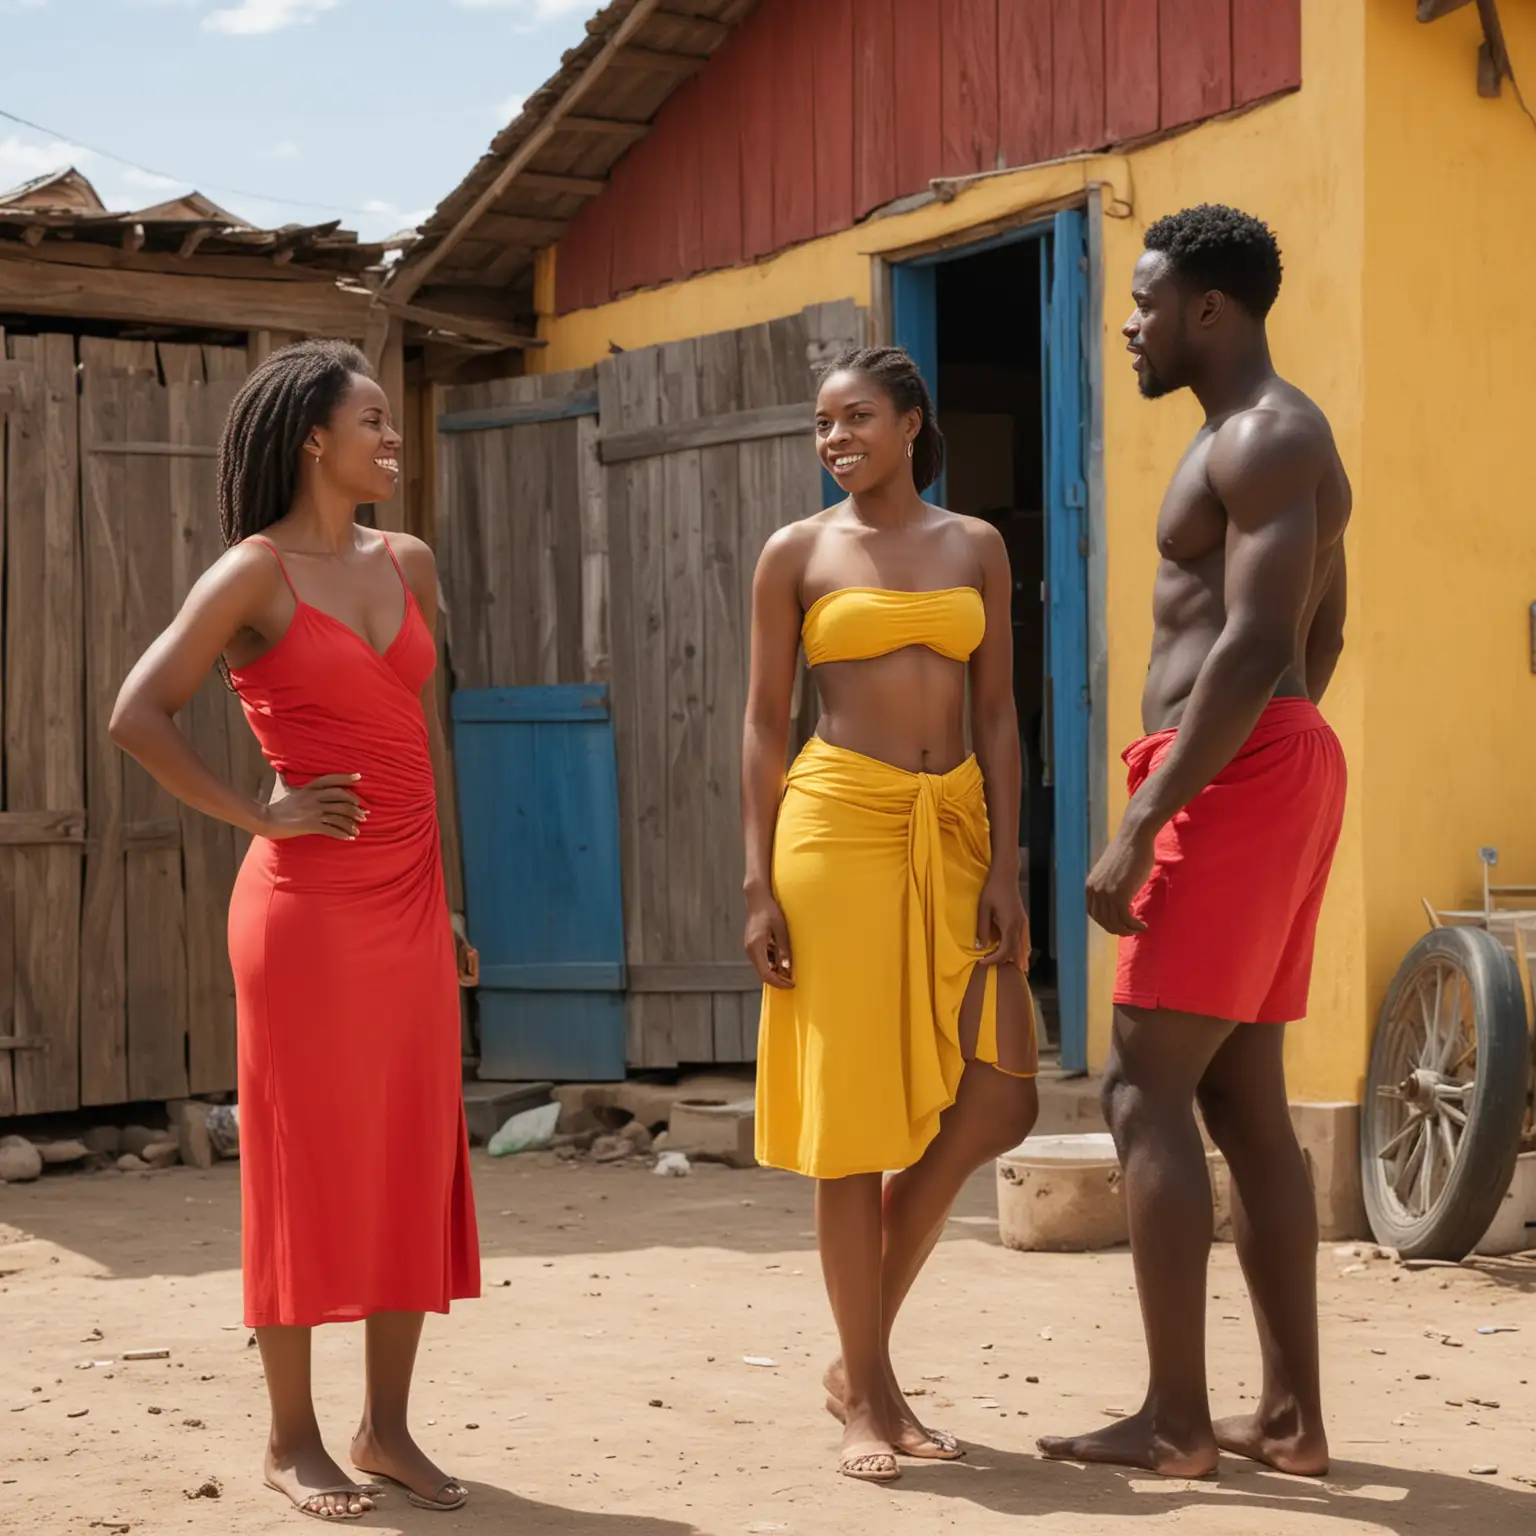 black woman in red dress talking in store a black woman and a shirtless black men in village houses colour red yellow blue